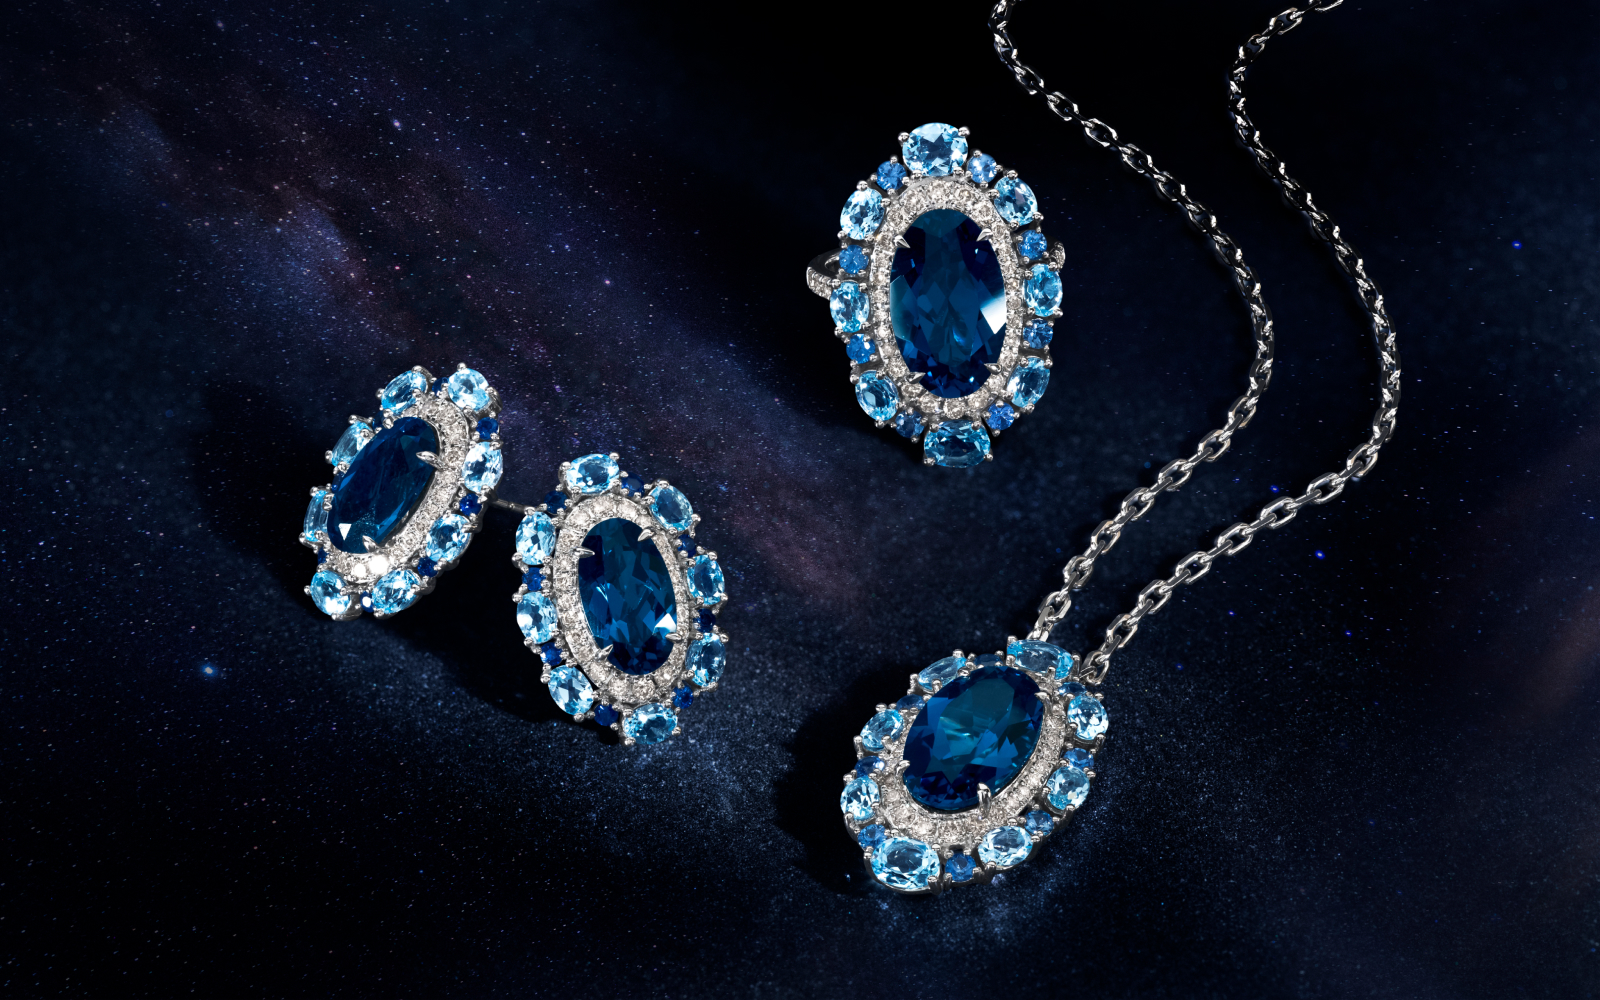 Le Vian® earrings, pendant and ring with Deep Sea Blue Topaz™, blue topaz, Blueberry Sapphire™ and Nude Diamonds™ set in 14K Vanilla Gold®